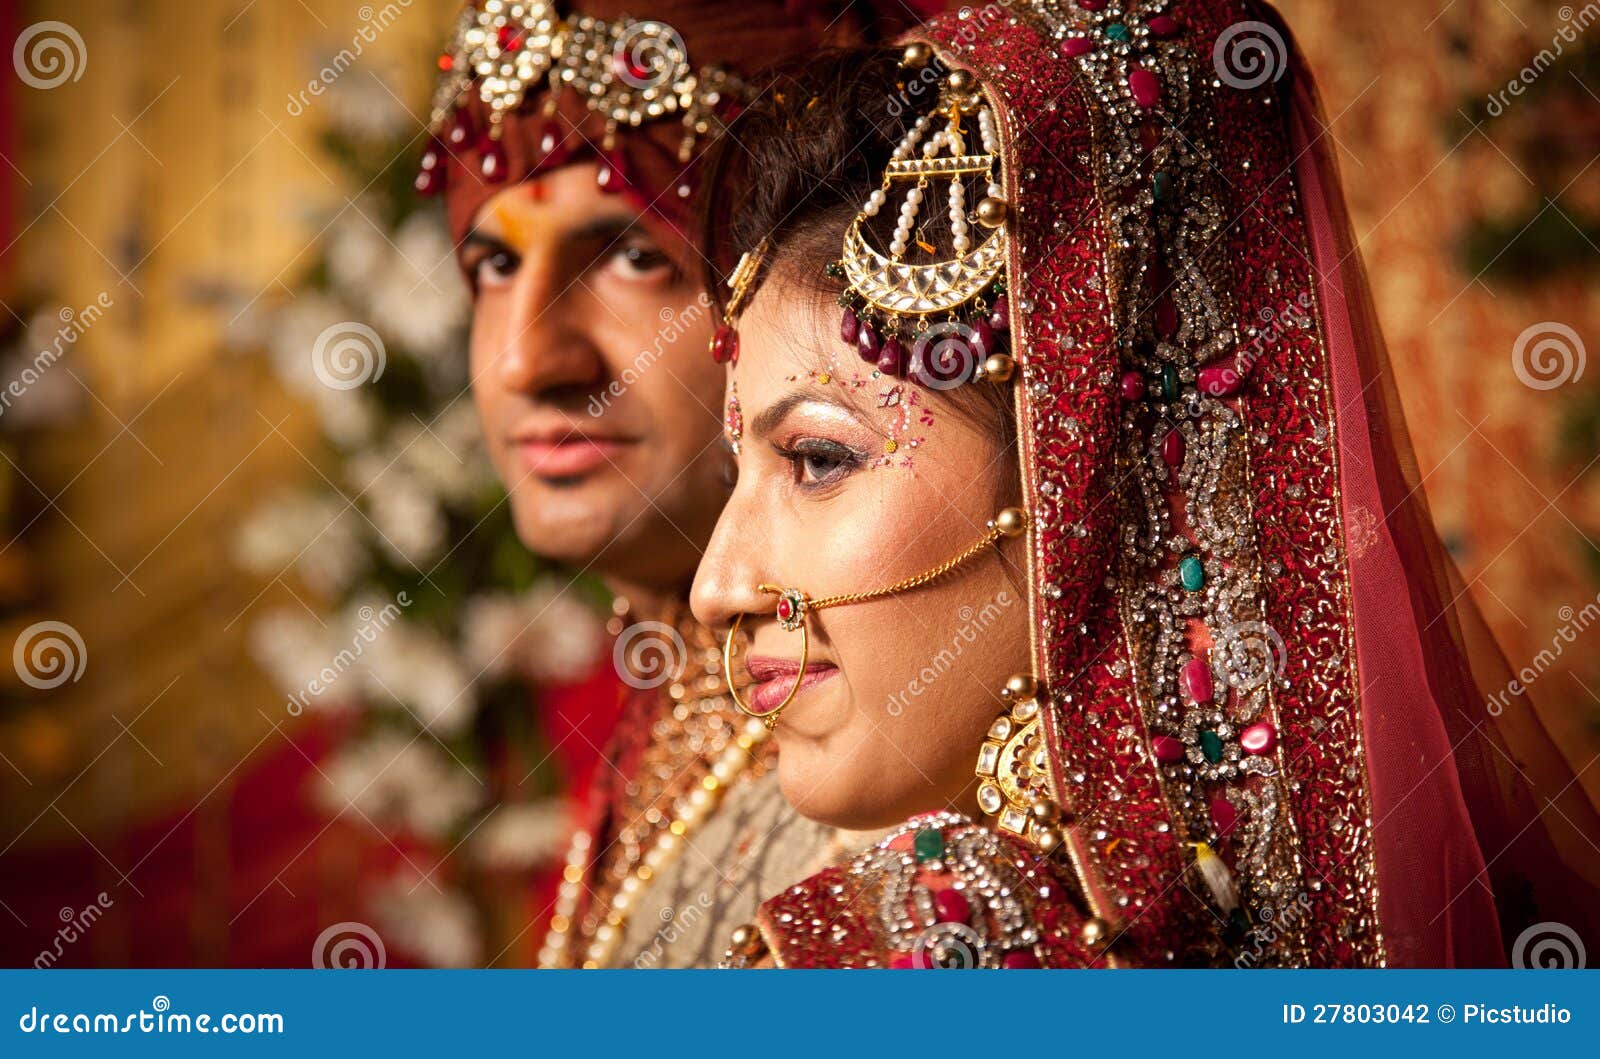 Indian Bride And Groom Stock Photo Image Of Jewellery 27803042